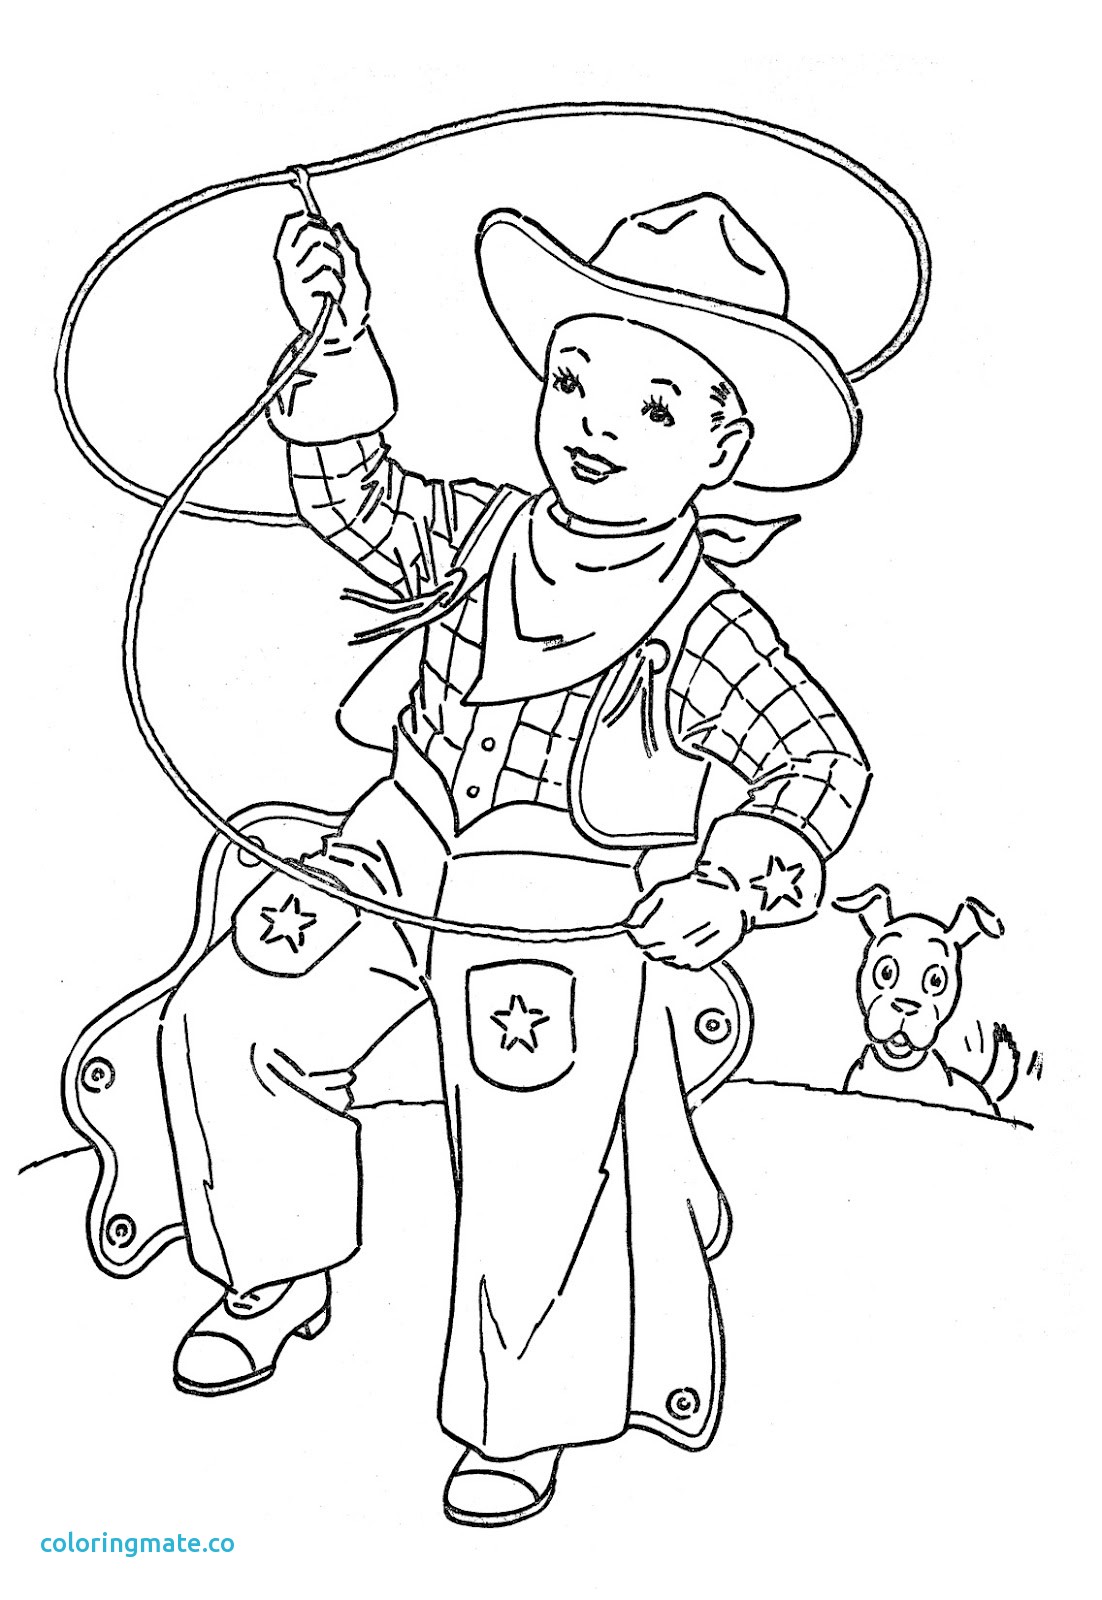 Cowboy Cowgirl Coloring Pages at GetColorings.com | Free printable